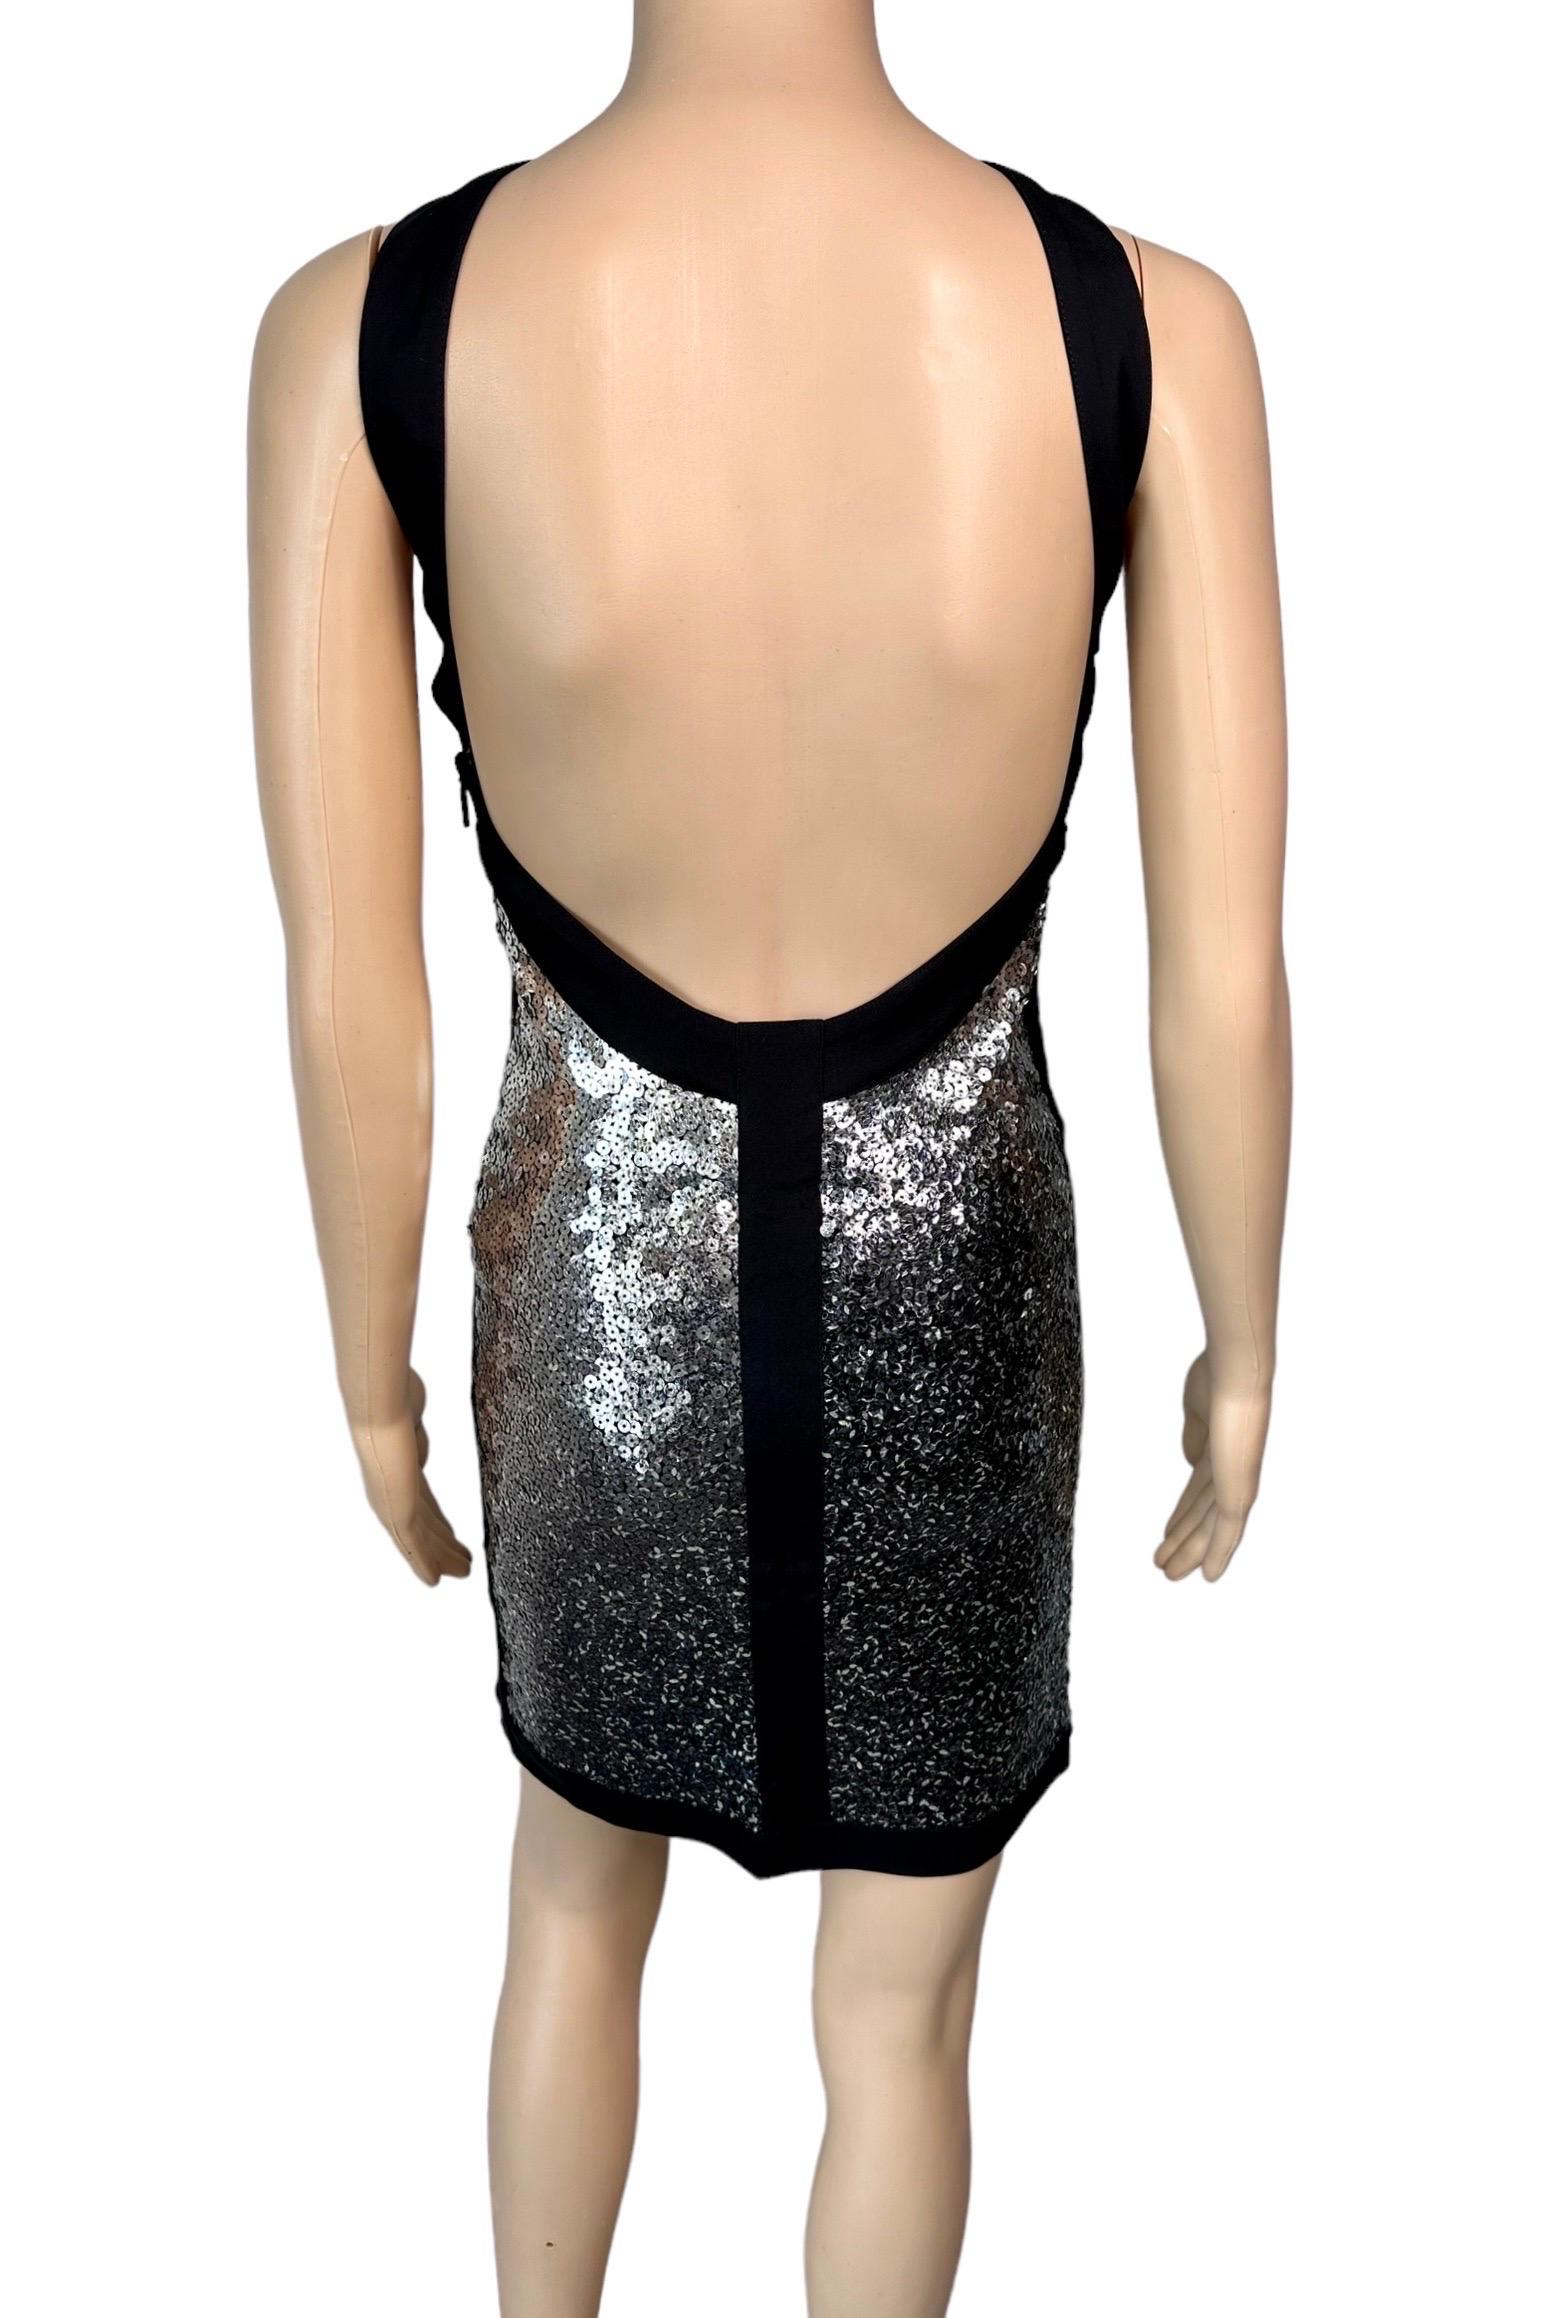 Roberto Cavalli S/S 2008 Runway Sequin Embellished Ombre Backless Mini Dress In Excellent Condition For Sale In Naples, FL